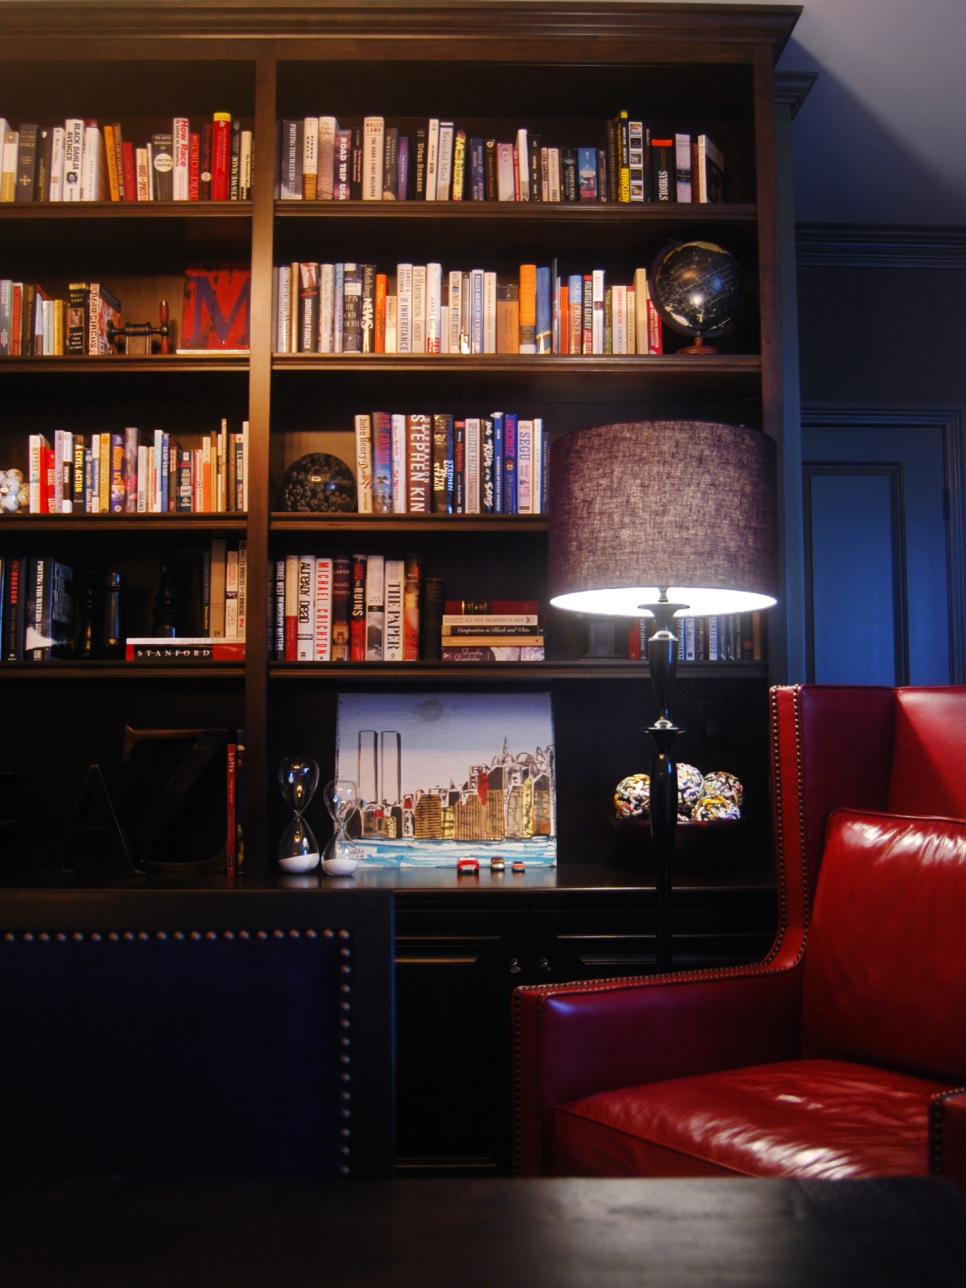 Wood Bookcase With Colorful Books and Red Leather Chair